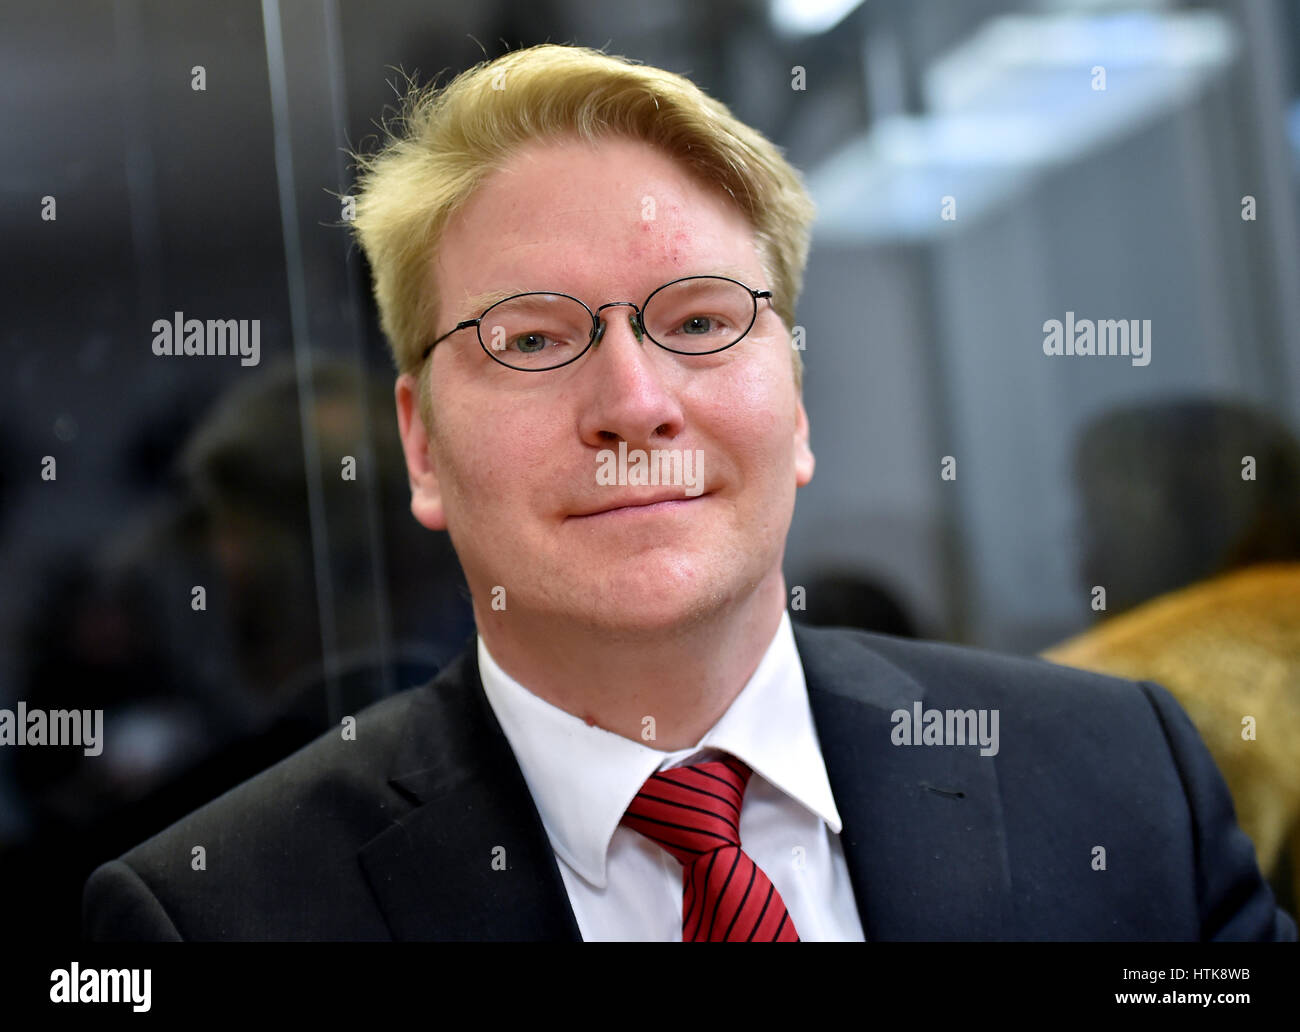 Berlin, Germany. 24th Feb, 2017. Christian Kott, the national chairman of the Liberal Conservative Reformers (LKR), a German political party founded by break-away members of the Alternative for Germany (AfD), at a hunting event in Berlin, Germany, 24 February 2017. Photo: Britta Pedersen/dpa-Zentralbild/ZB/dpa/Alamy Live News Stock Photo